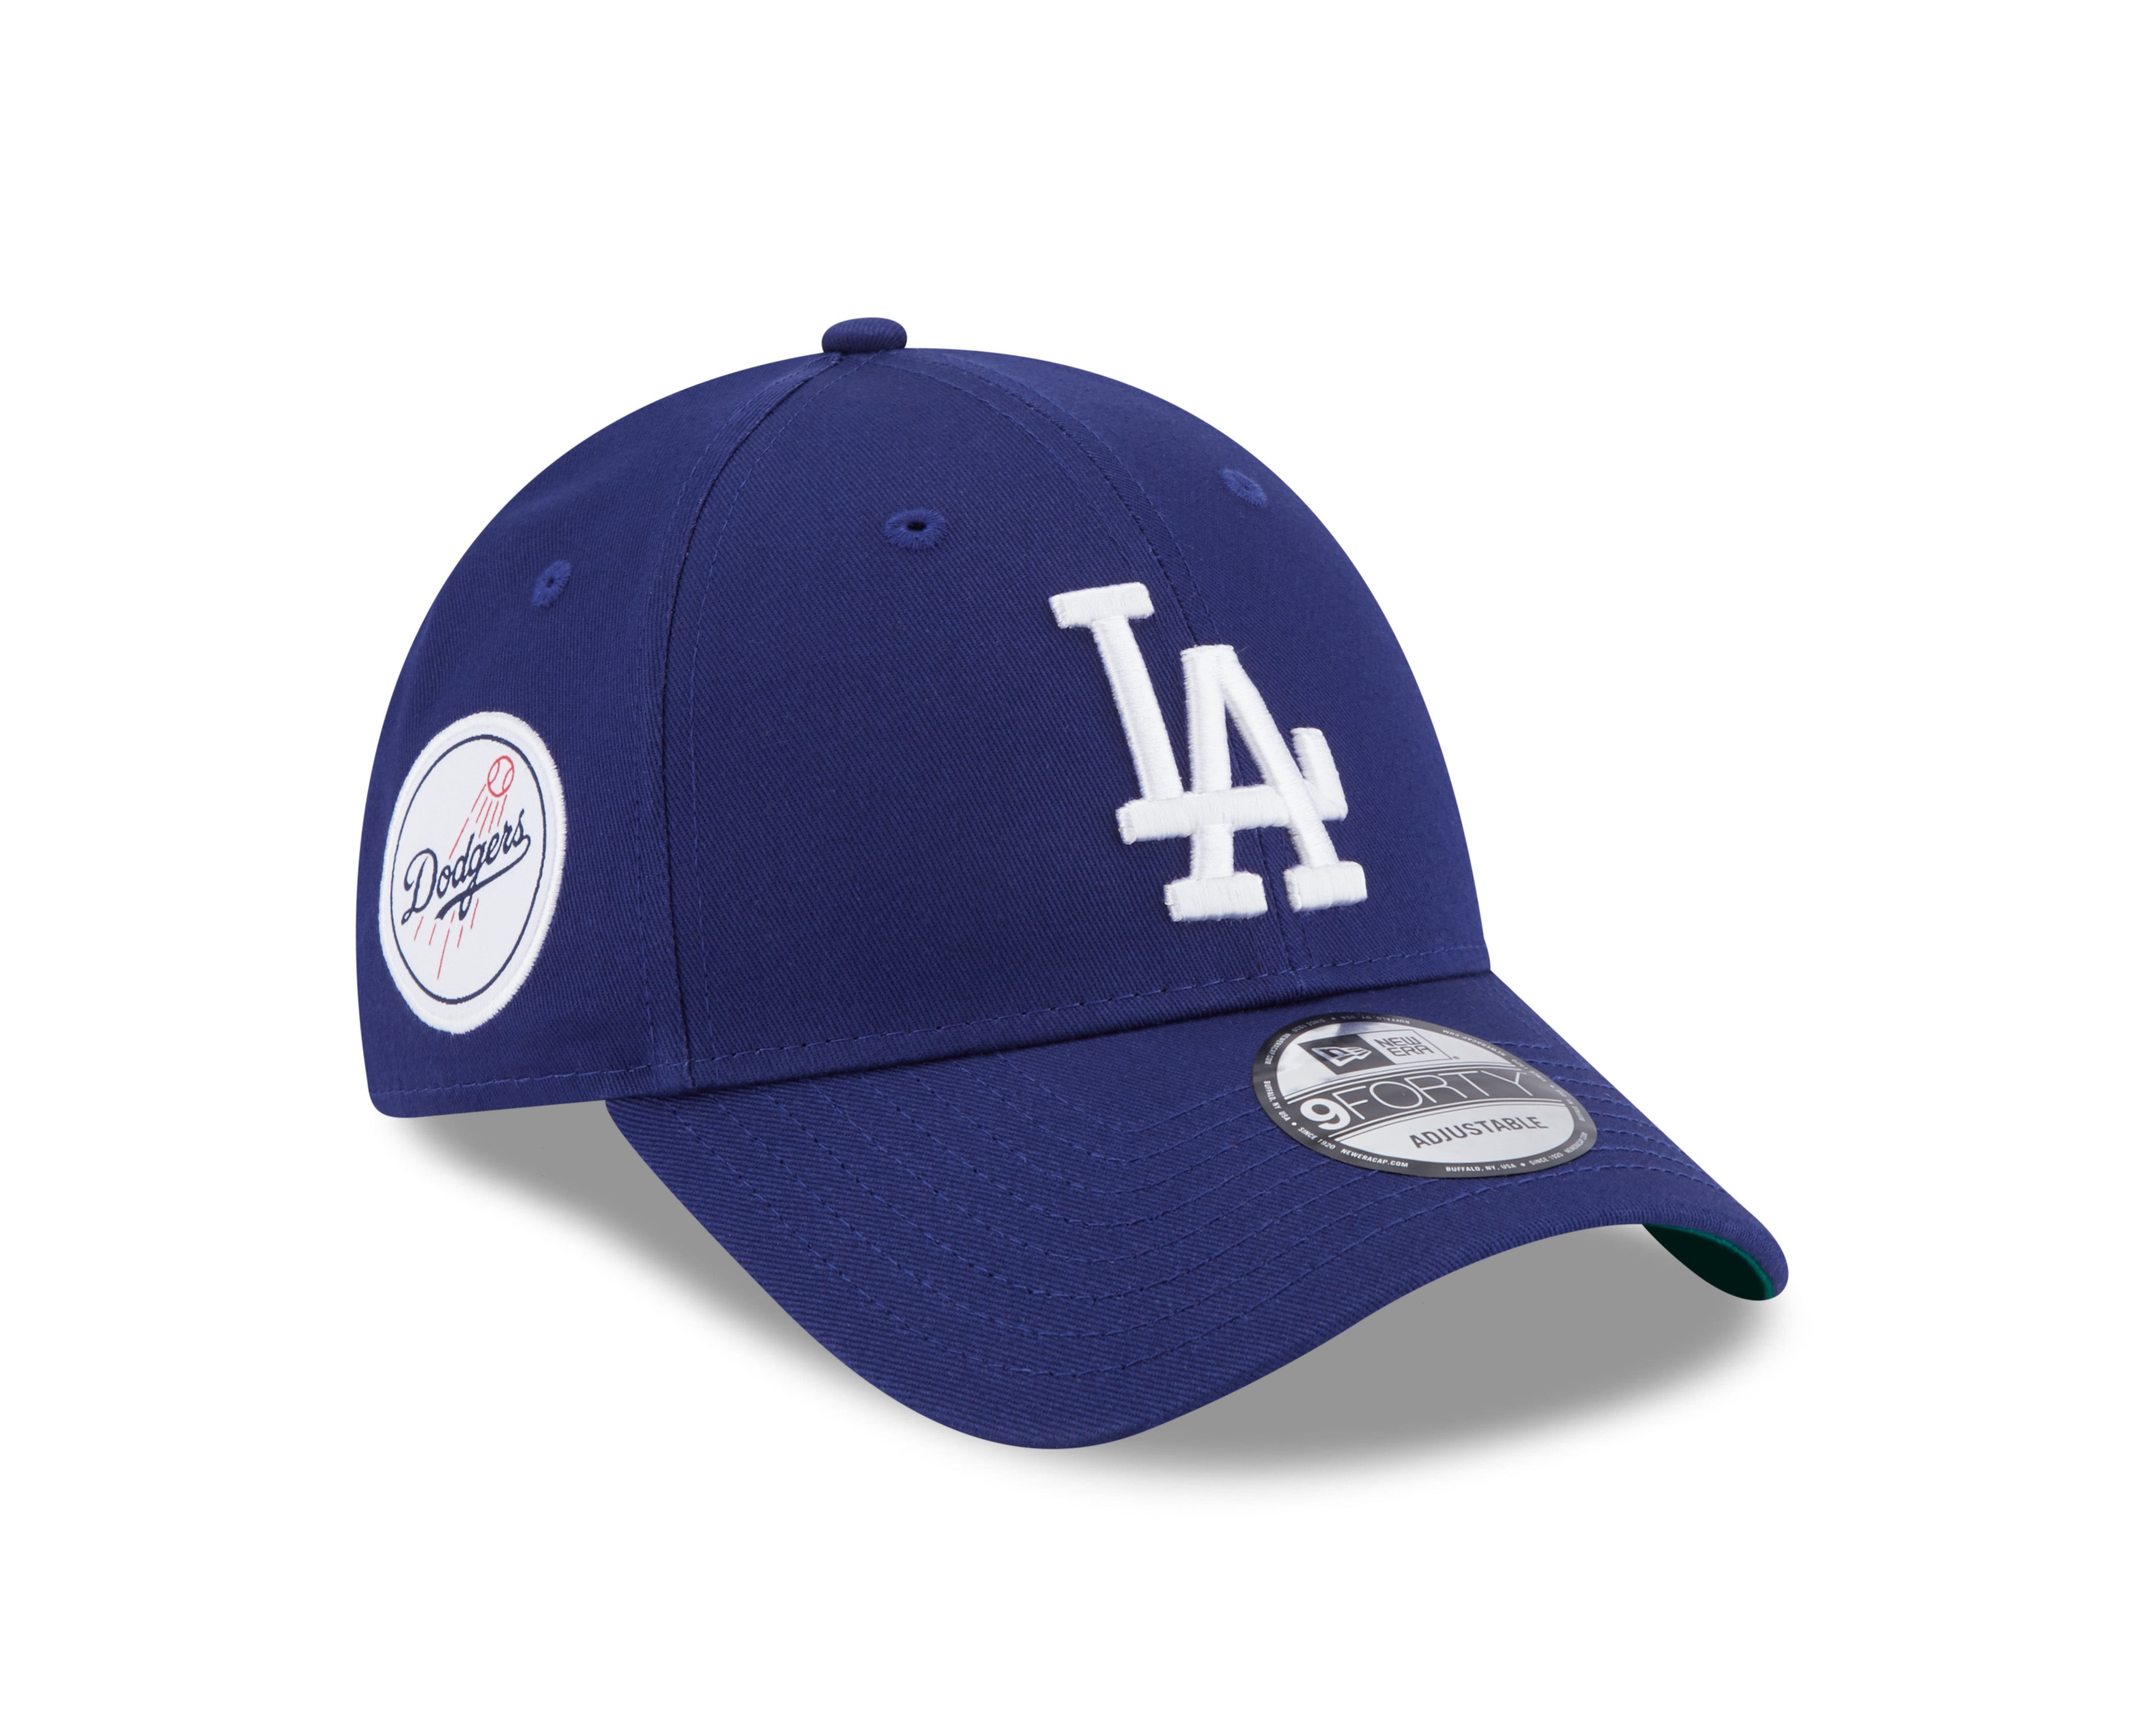 NEW ERA 9FORTY LOS ANGELES DODGERS TEAM SIDE PATCH BLUE / KELLY GREEN CAP